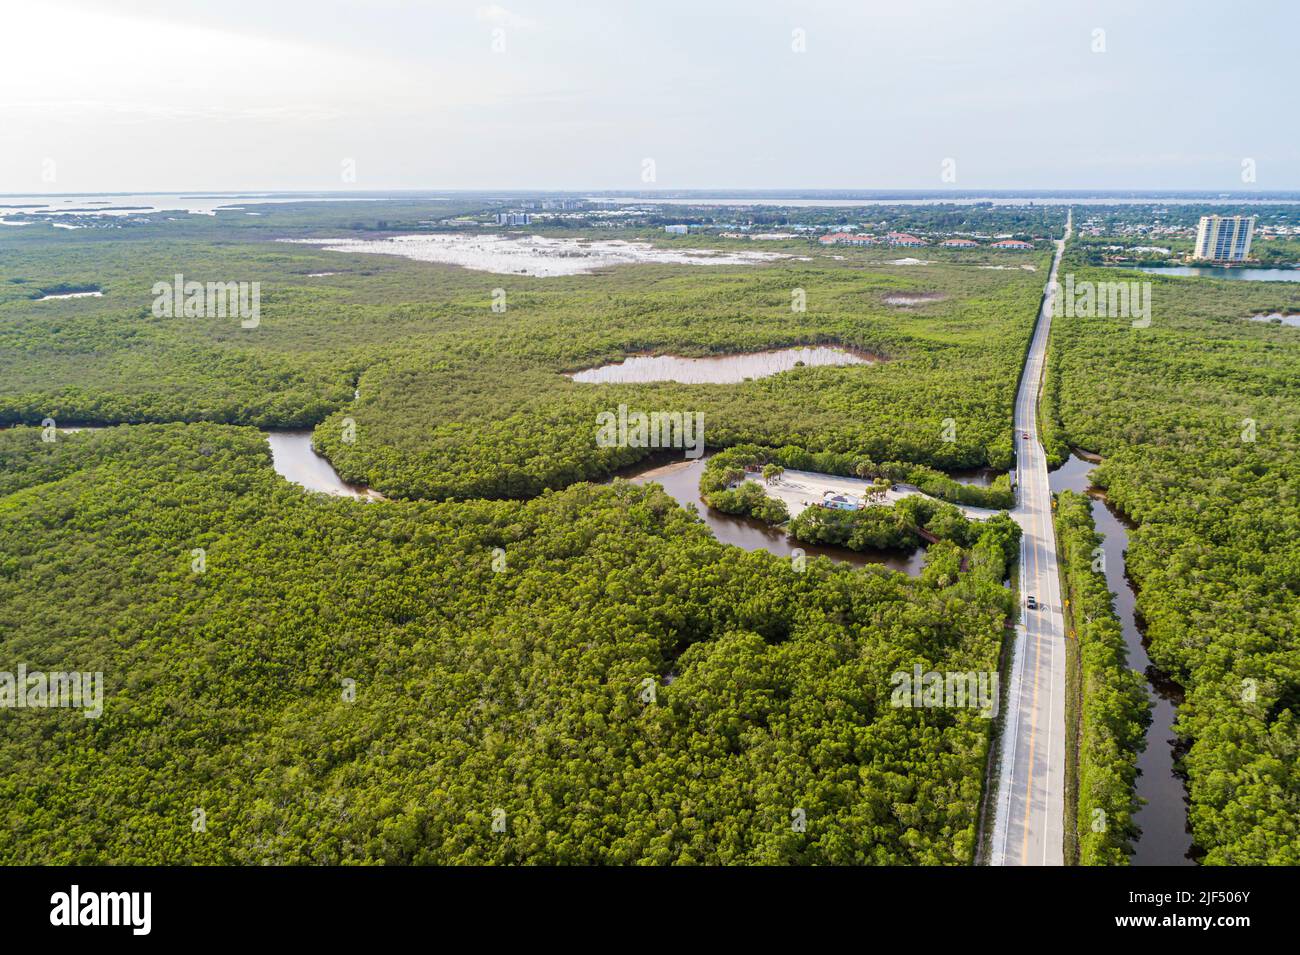 Fort Ft. Myers Florida,San Carlos Bay Bunche Beach Preserve wetlands,natural scenery aerial overhead view from above,John Morris Road Stock Photo